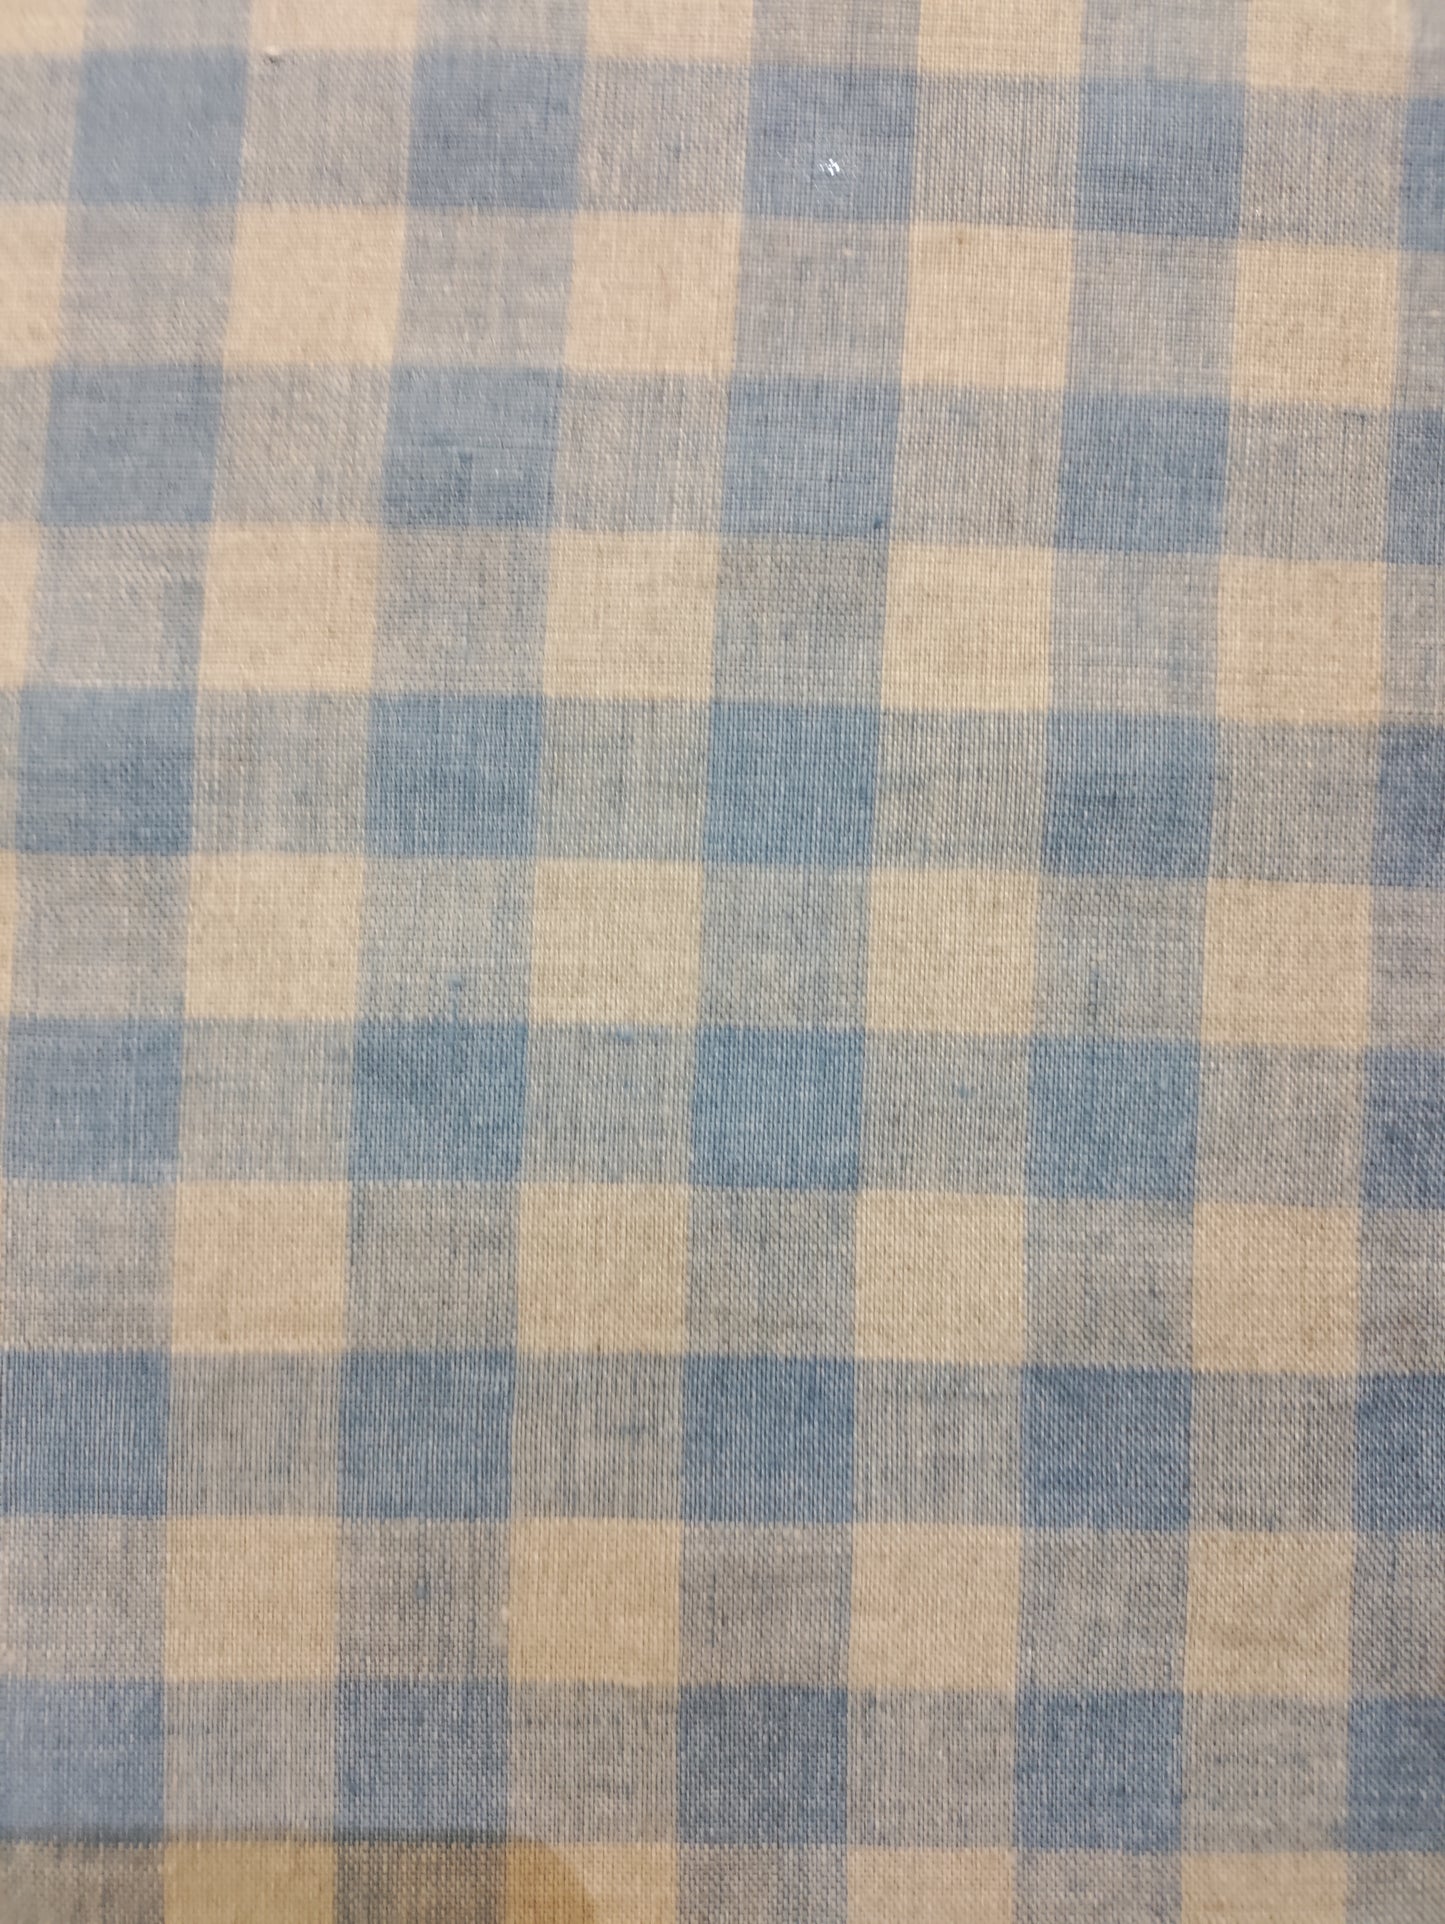 Washed Linen Check - Blue